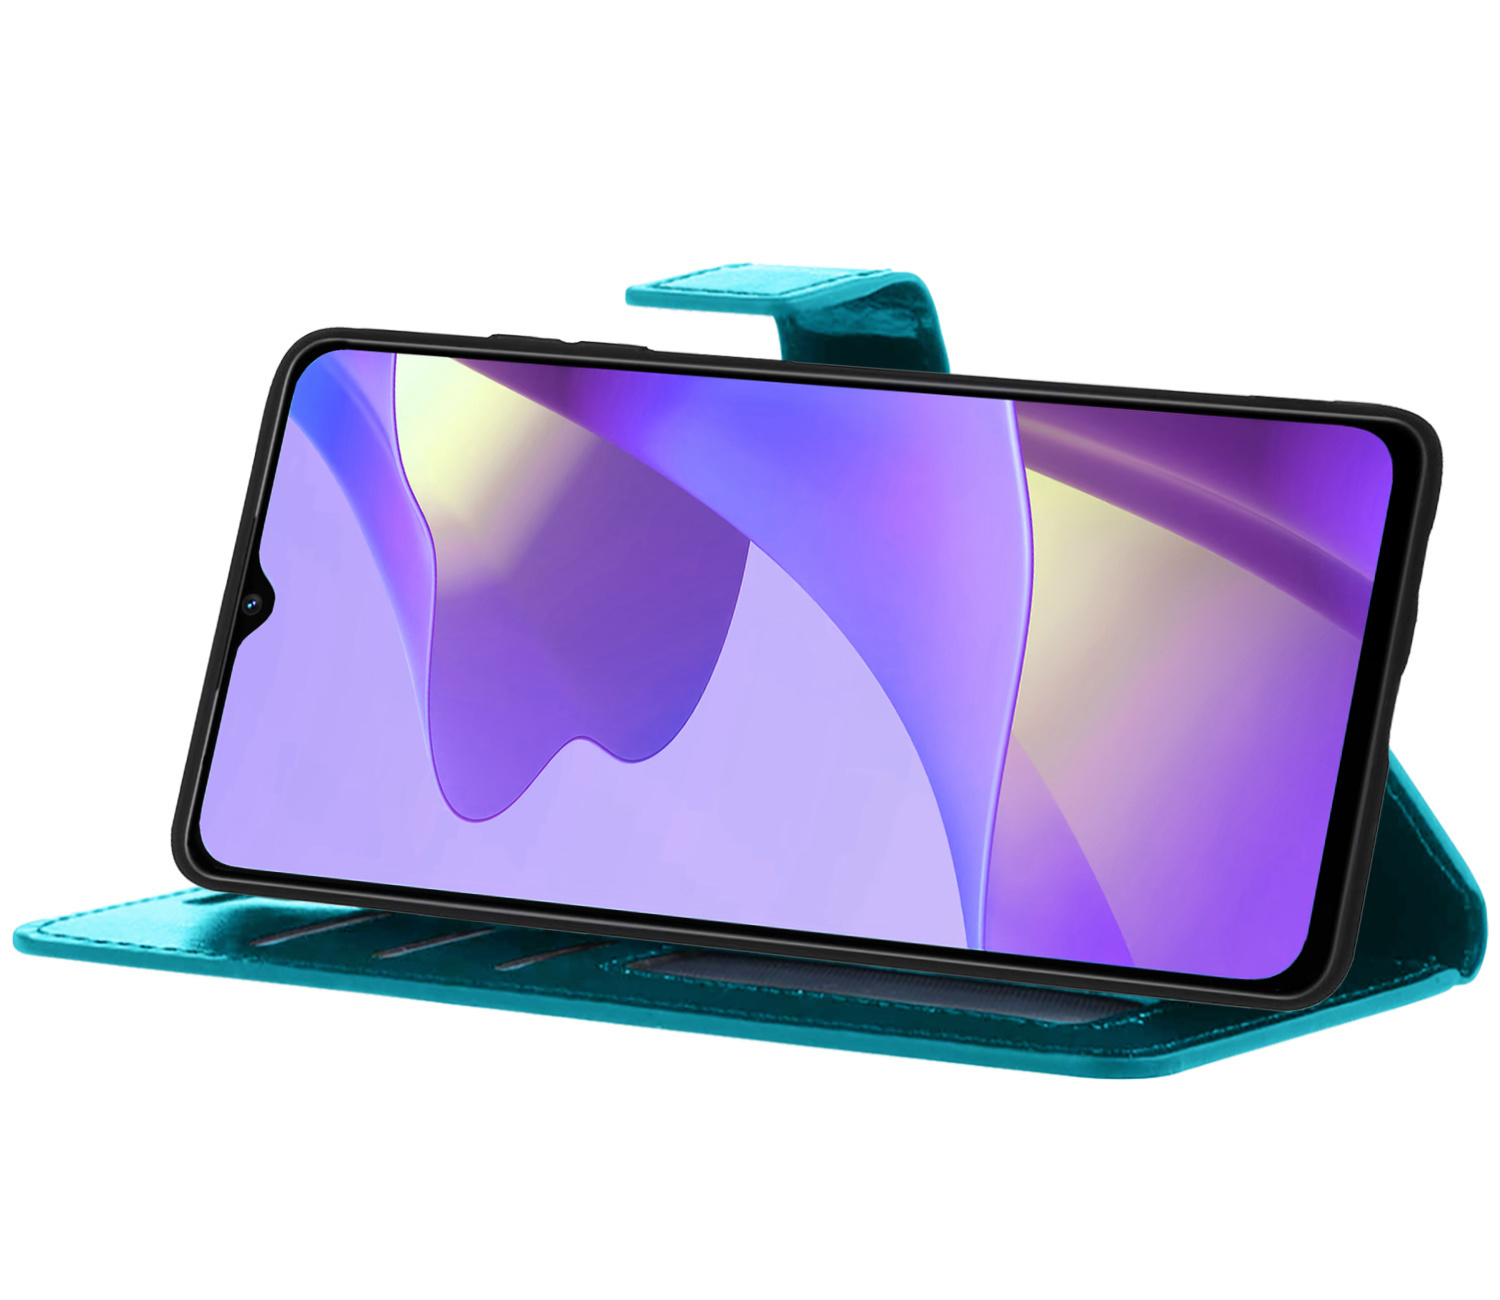 Nomfy OPPO A16s Hoesje Bookcase Met Screenprotector - OPPO A16s Screenprotector - OPPO A16s Book Case Met Screenprotector Turquoise